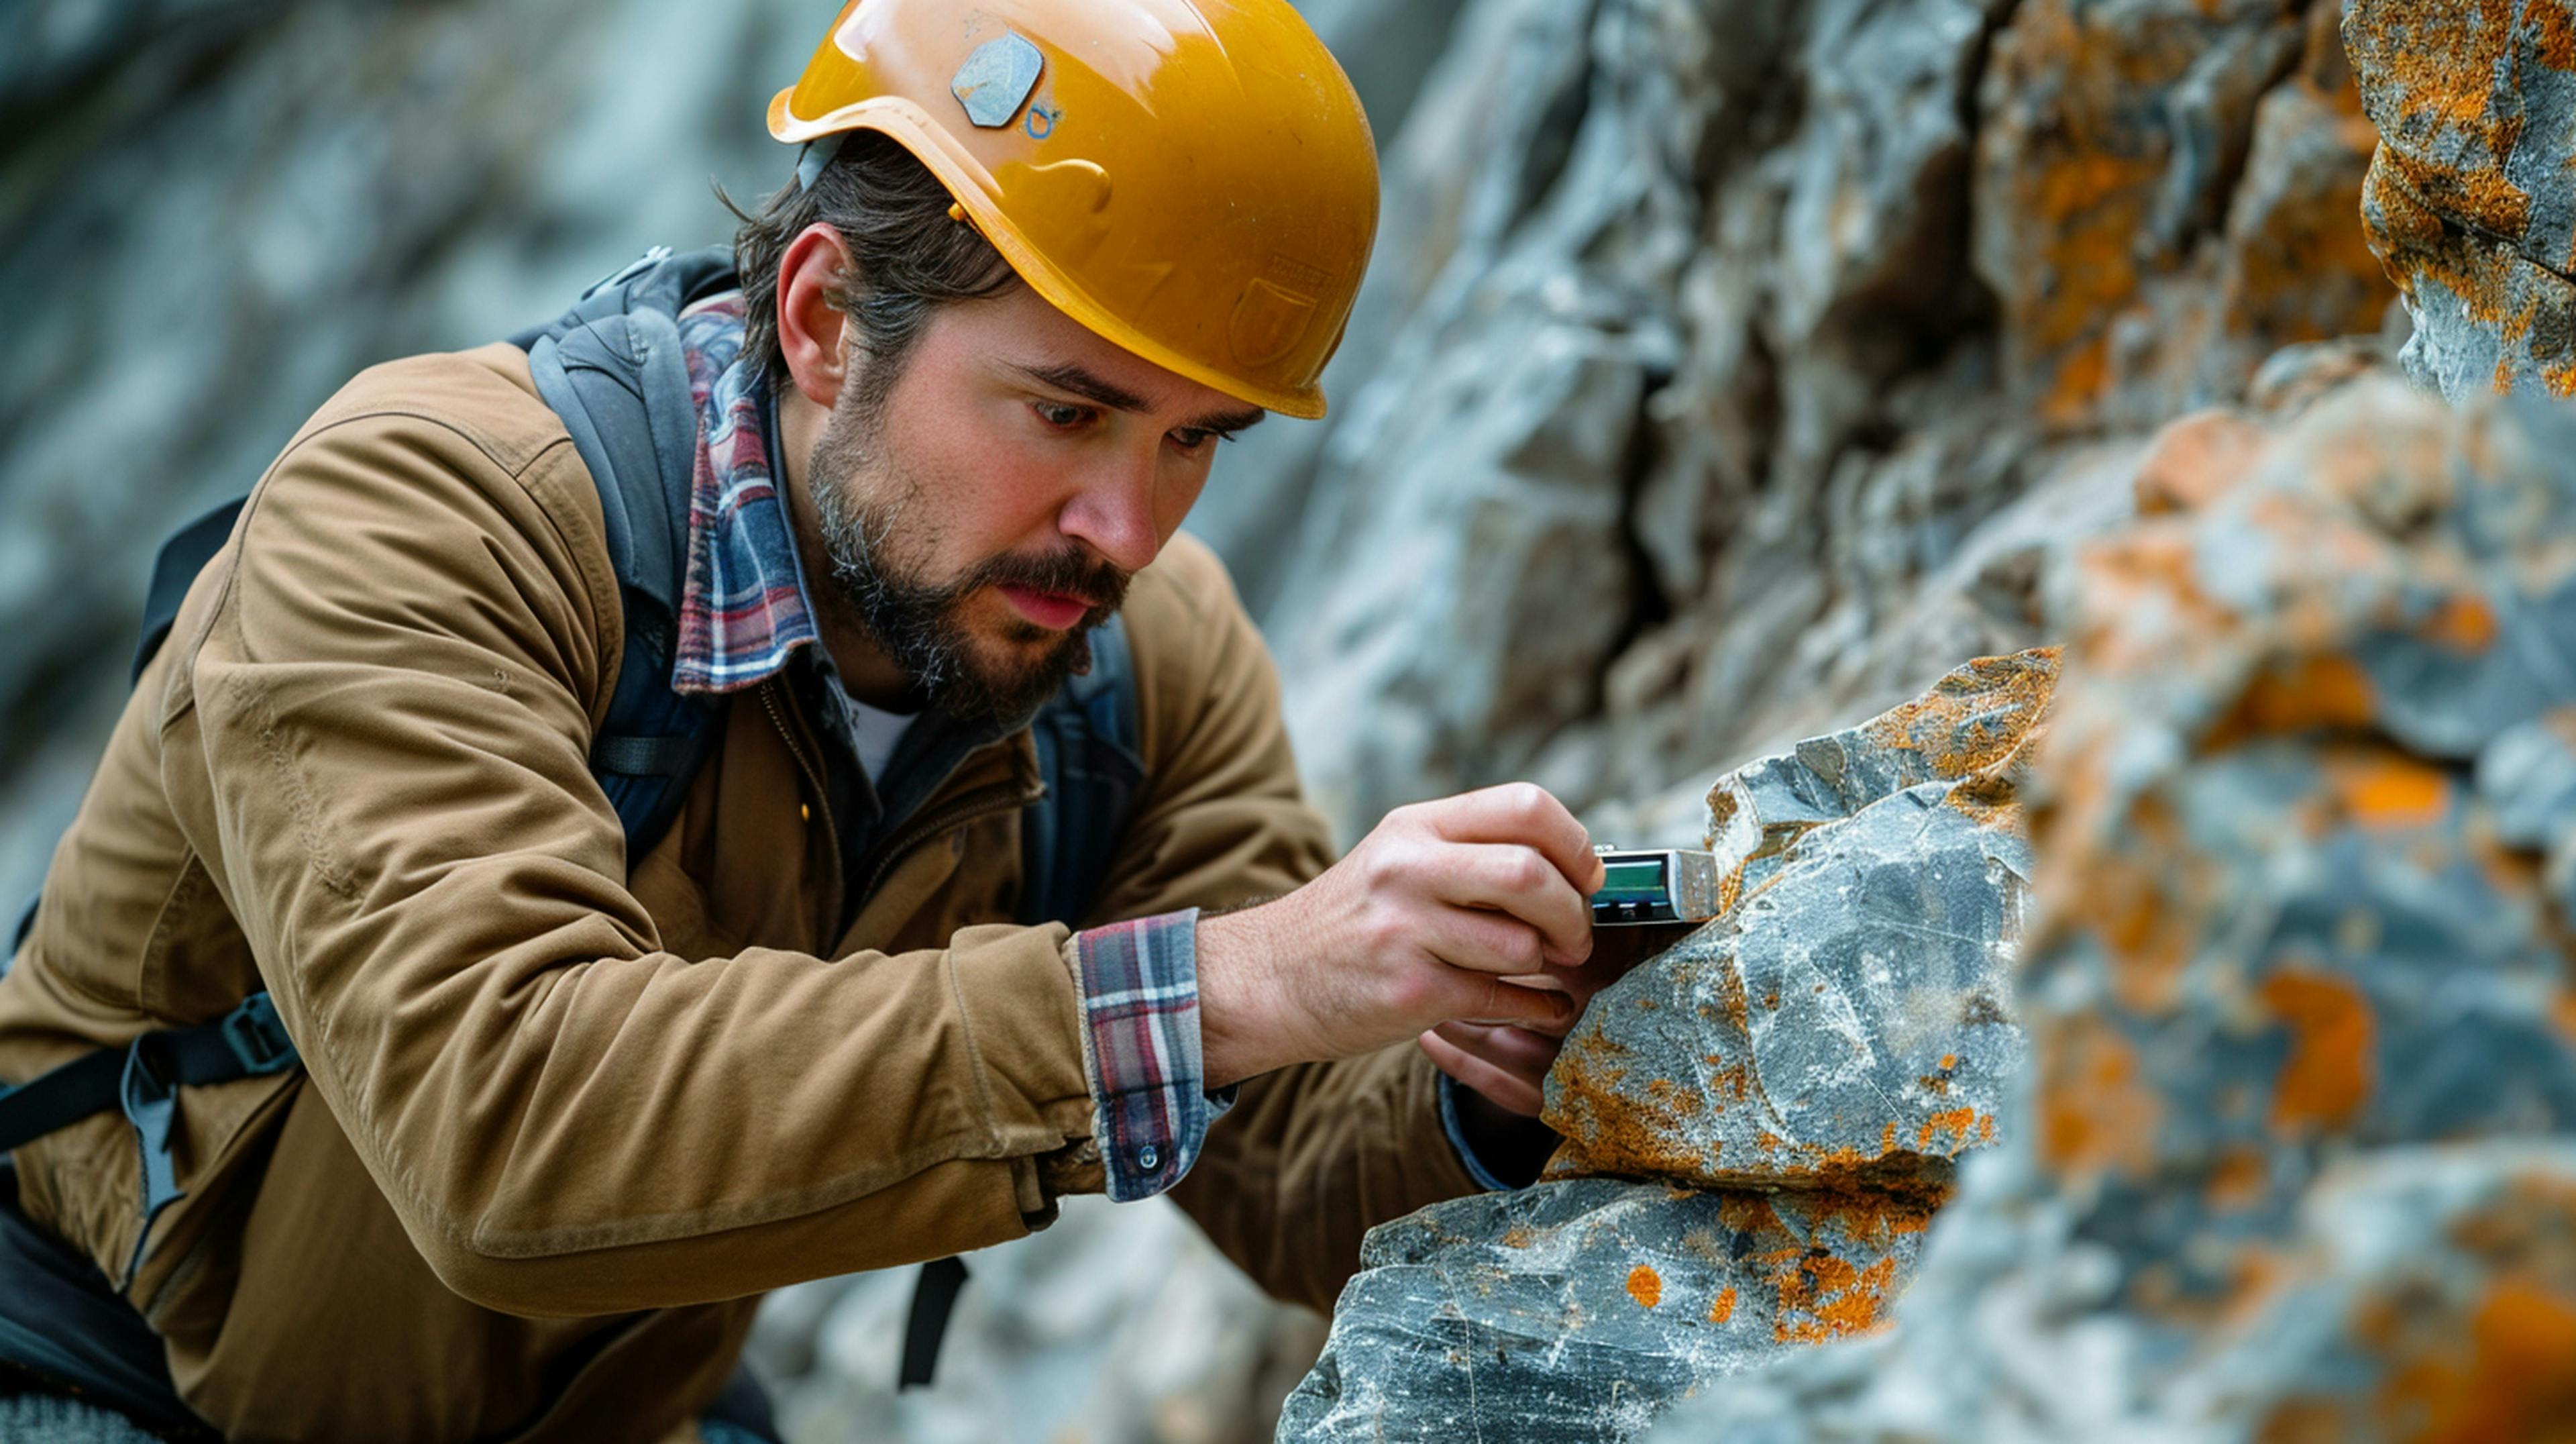 Geologist using a handheld spectrometer to analyze the mineral composition of a rock sample. © julia - stock.adobe.com